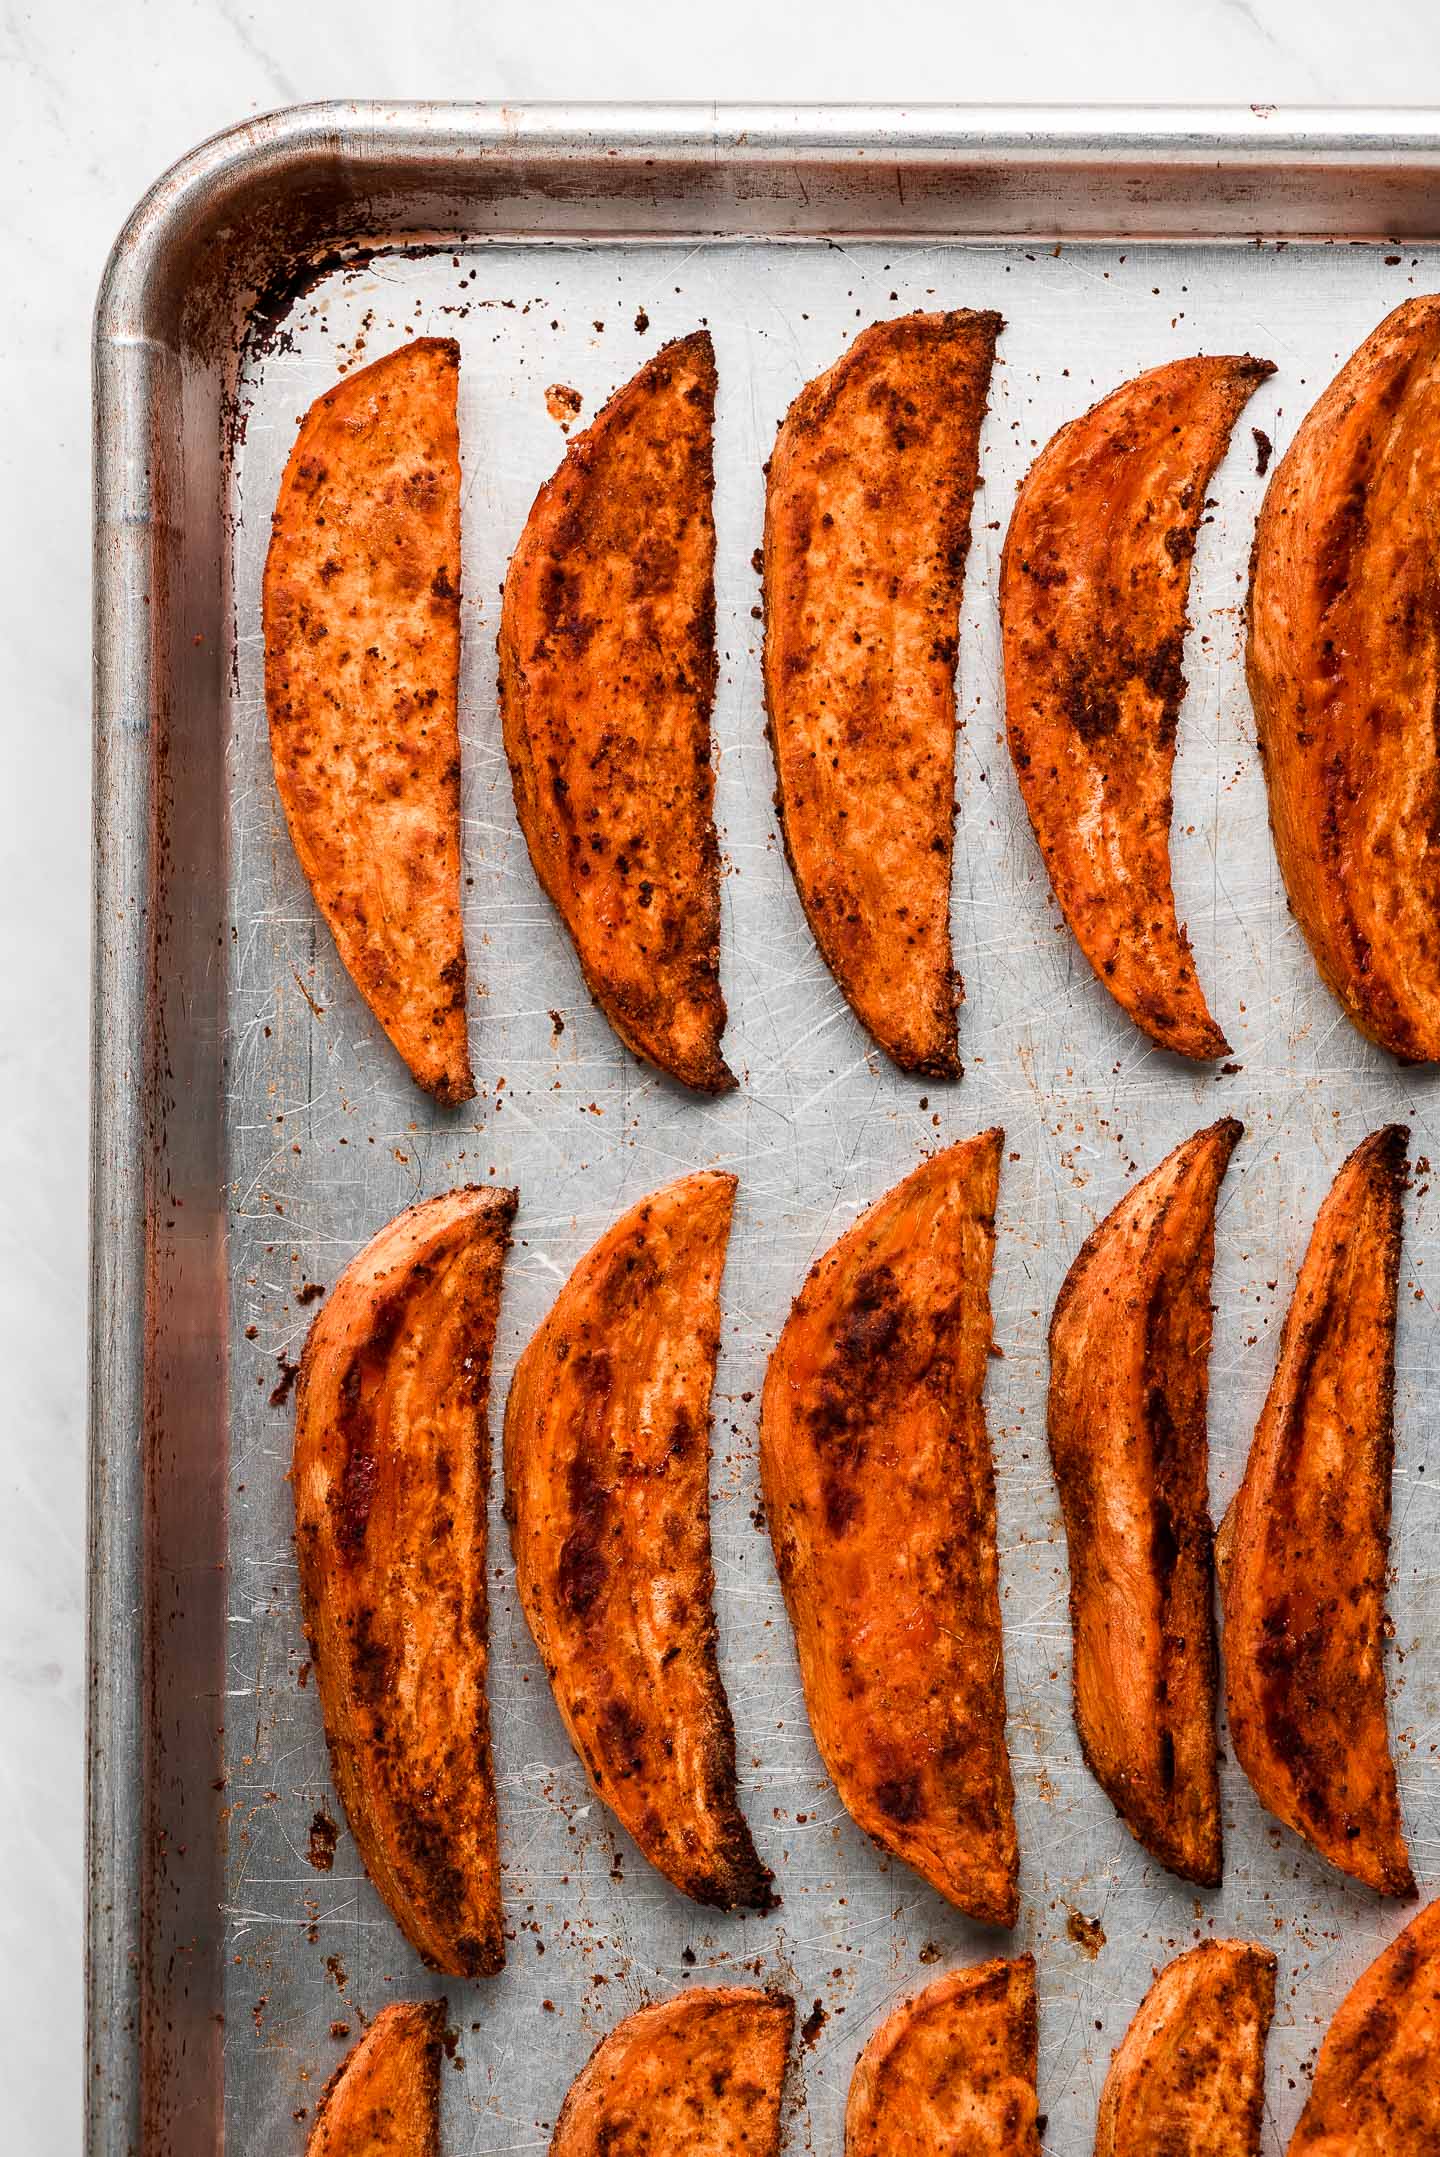 Baked Sweet Potato Wedges lined up on a baking sheet.